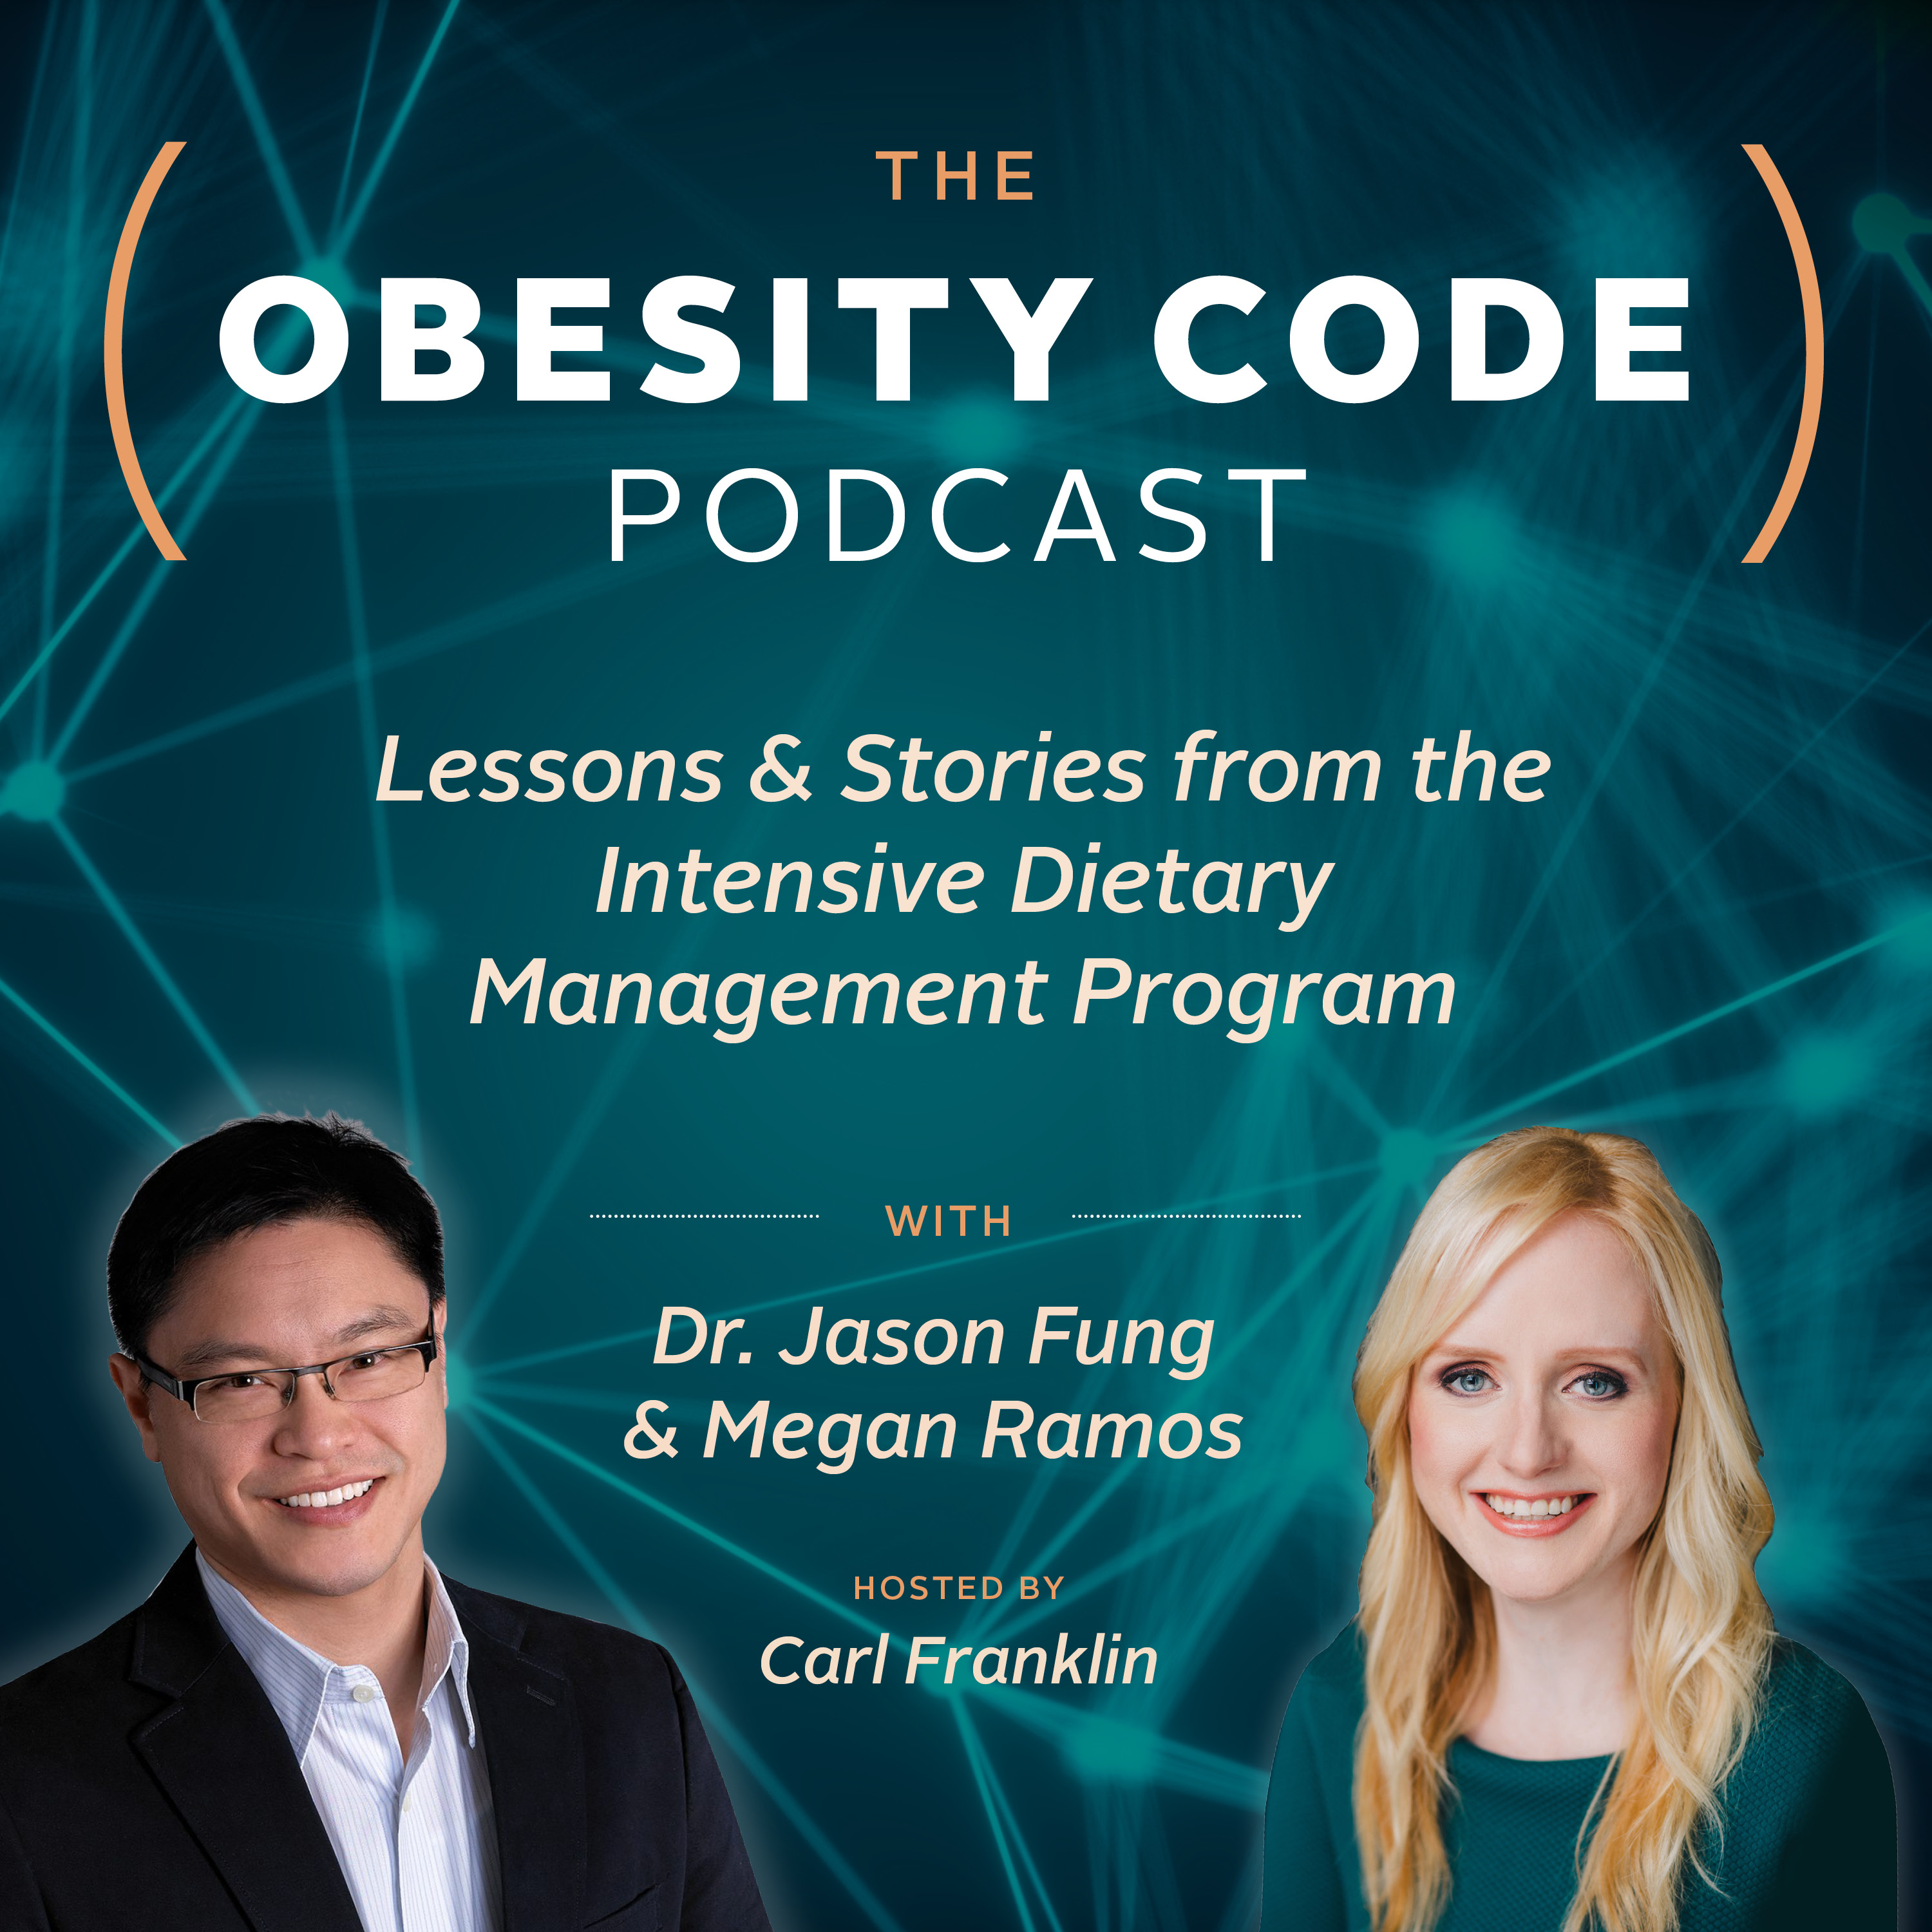 The Obesity Code Podcast